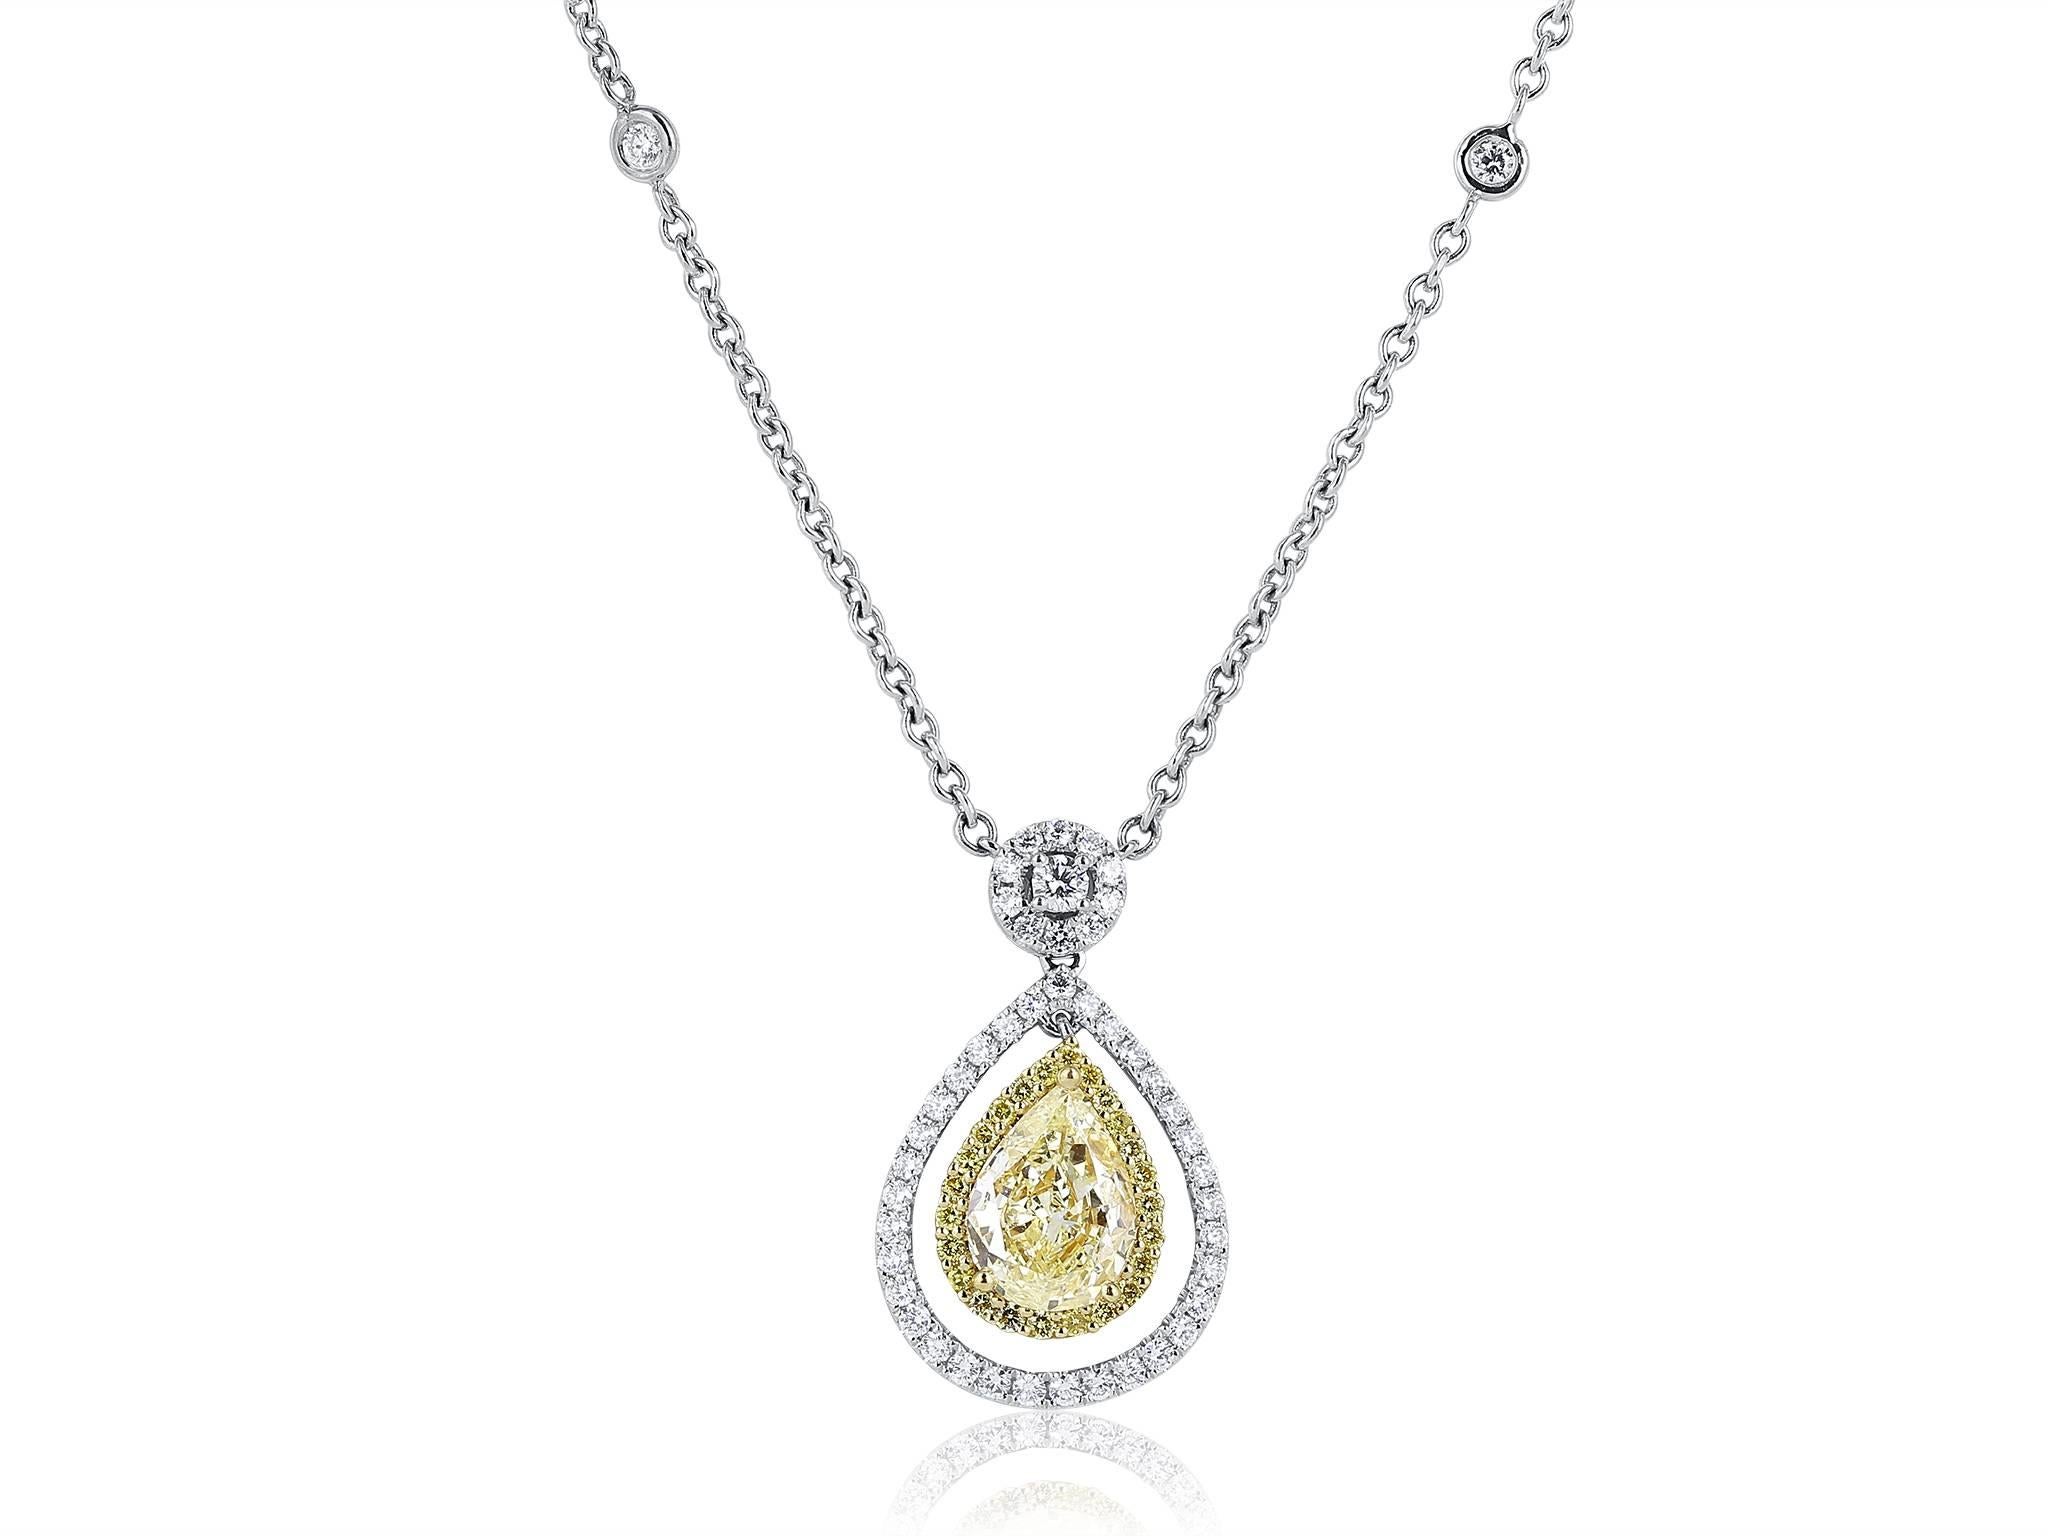 Two tone 18 karat white & yellow gold pendant consisting of 1 pear shape canary diamond weighing 2.02 carats set with 1.01 carats total weight of colorless full cut diamonds & .26 carats total weight of full cut canary diamonds.